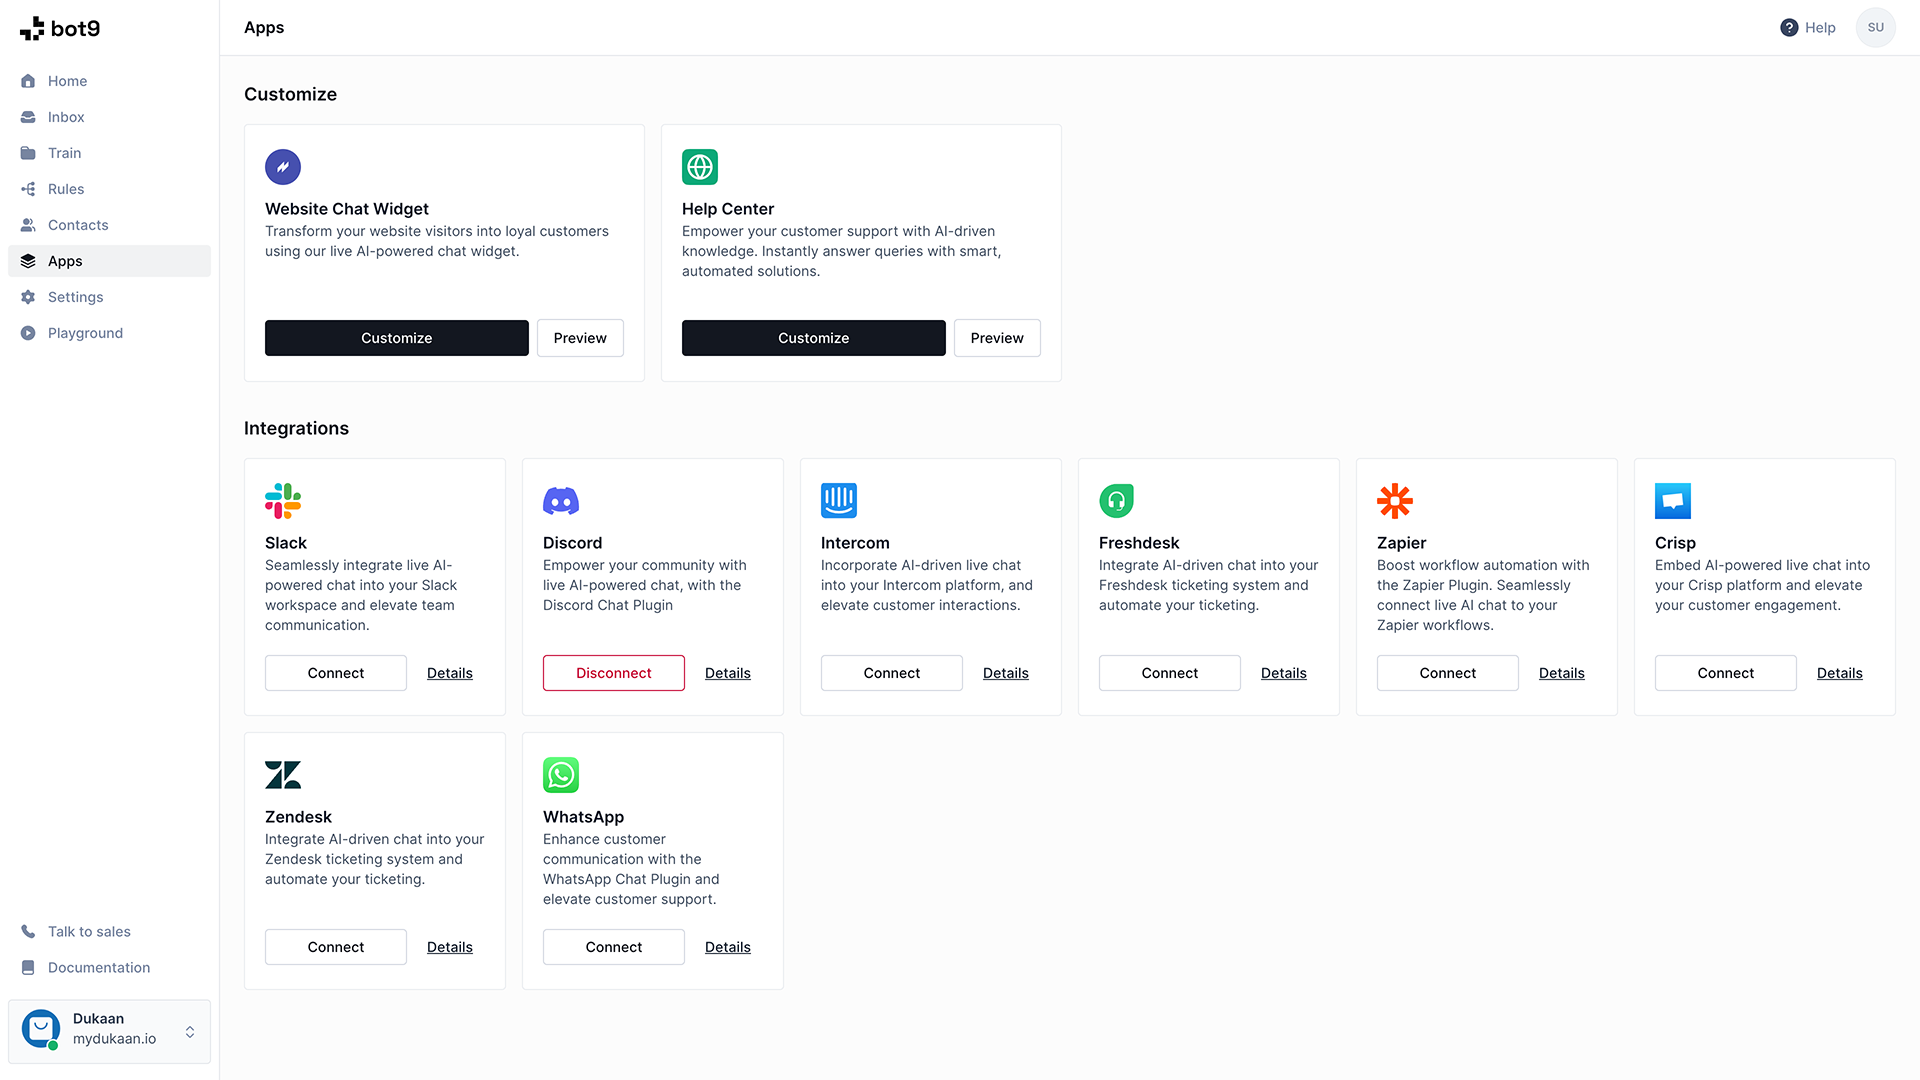 Personalized workflow apps